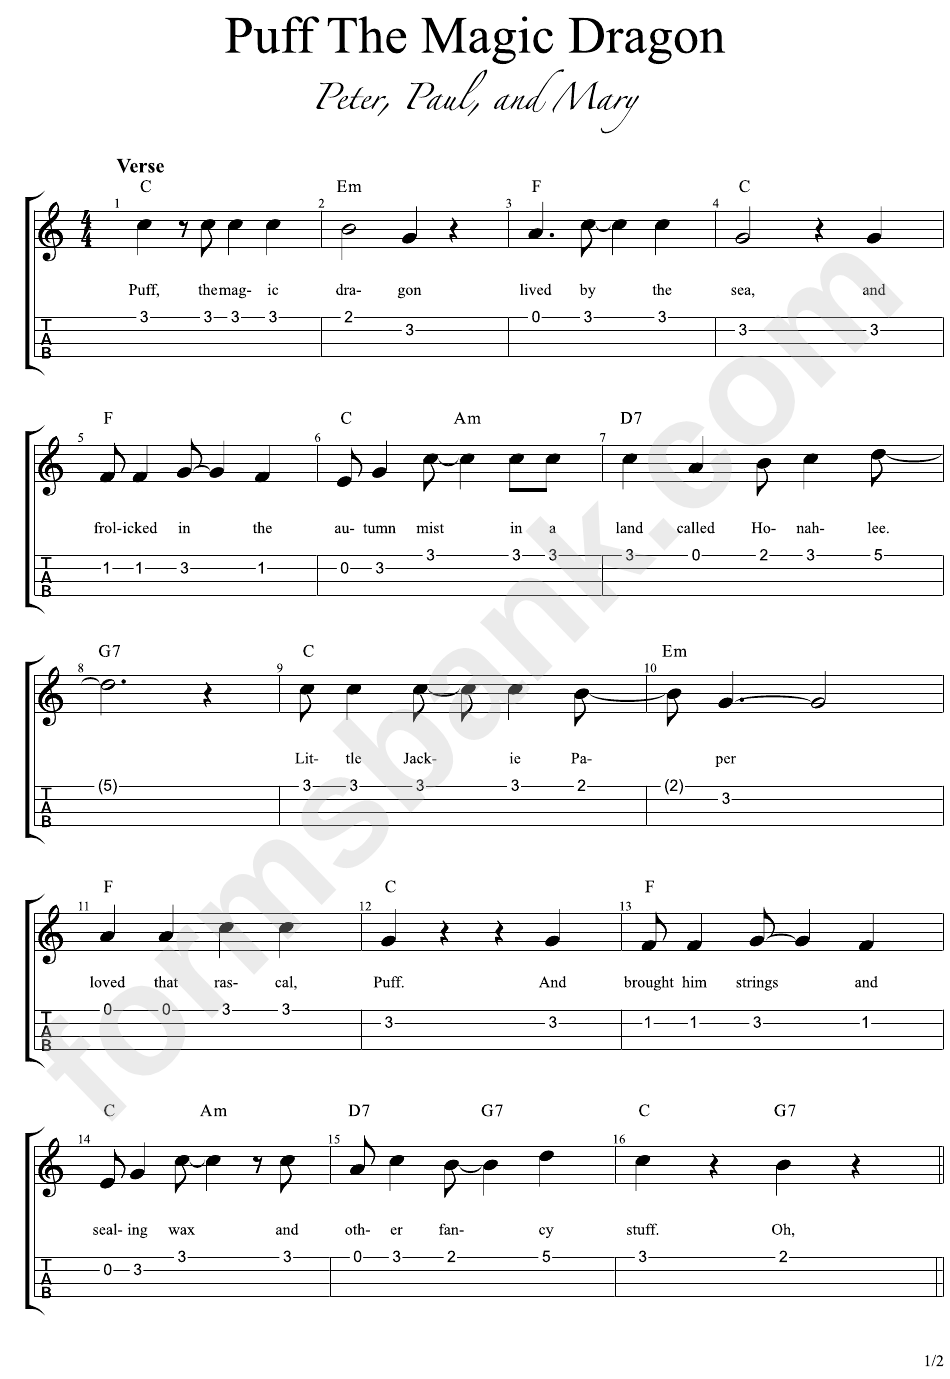 Peter, Paul And Mary - Puff The Magic Dragon Sheet Music